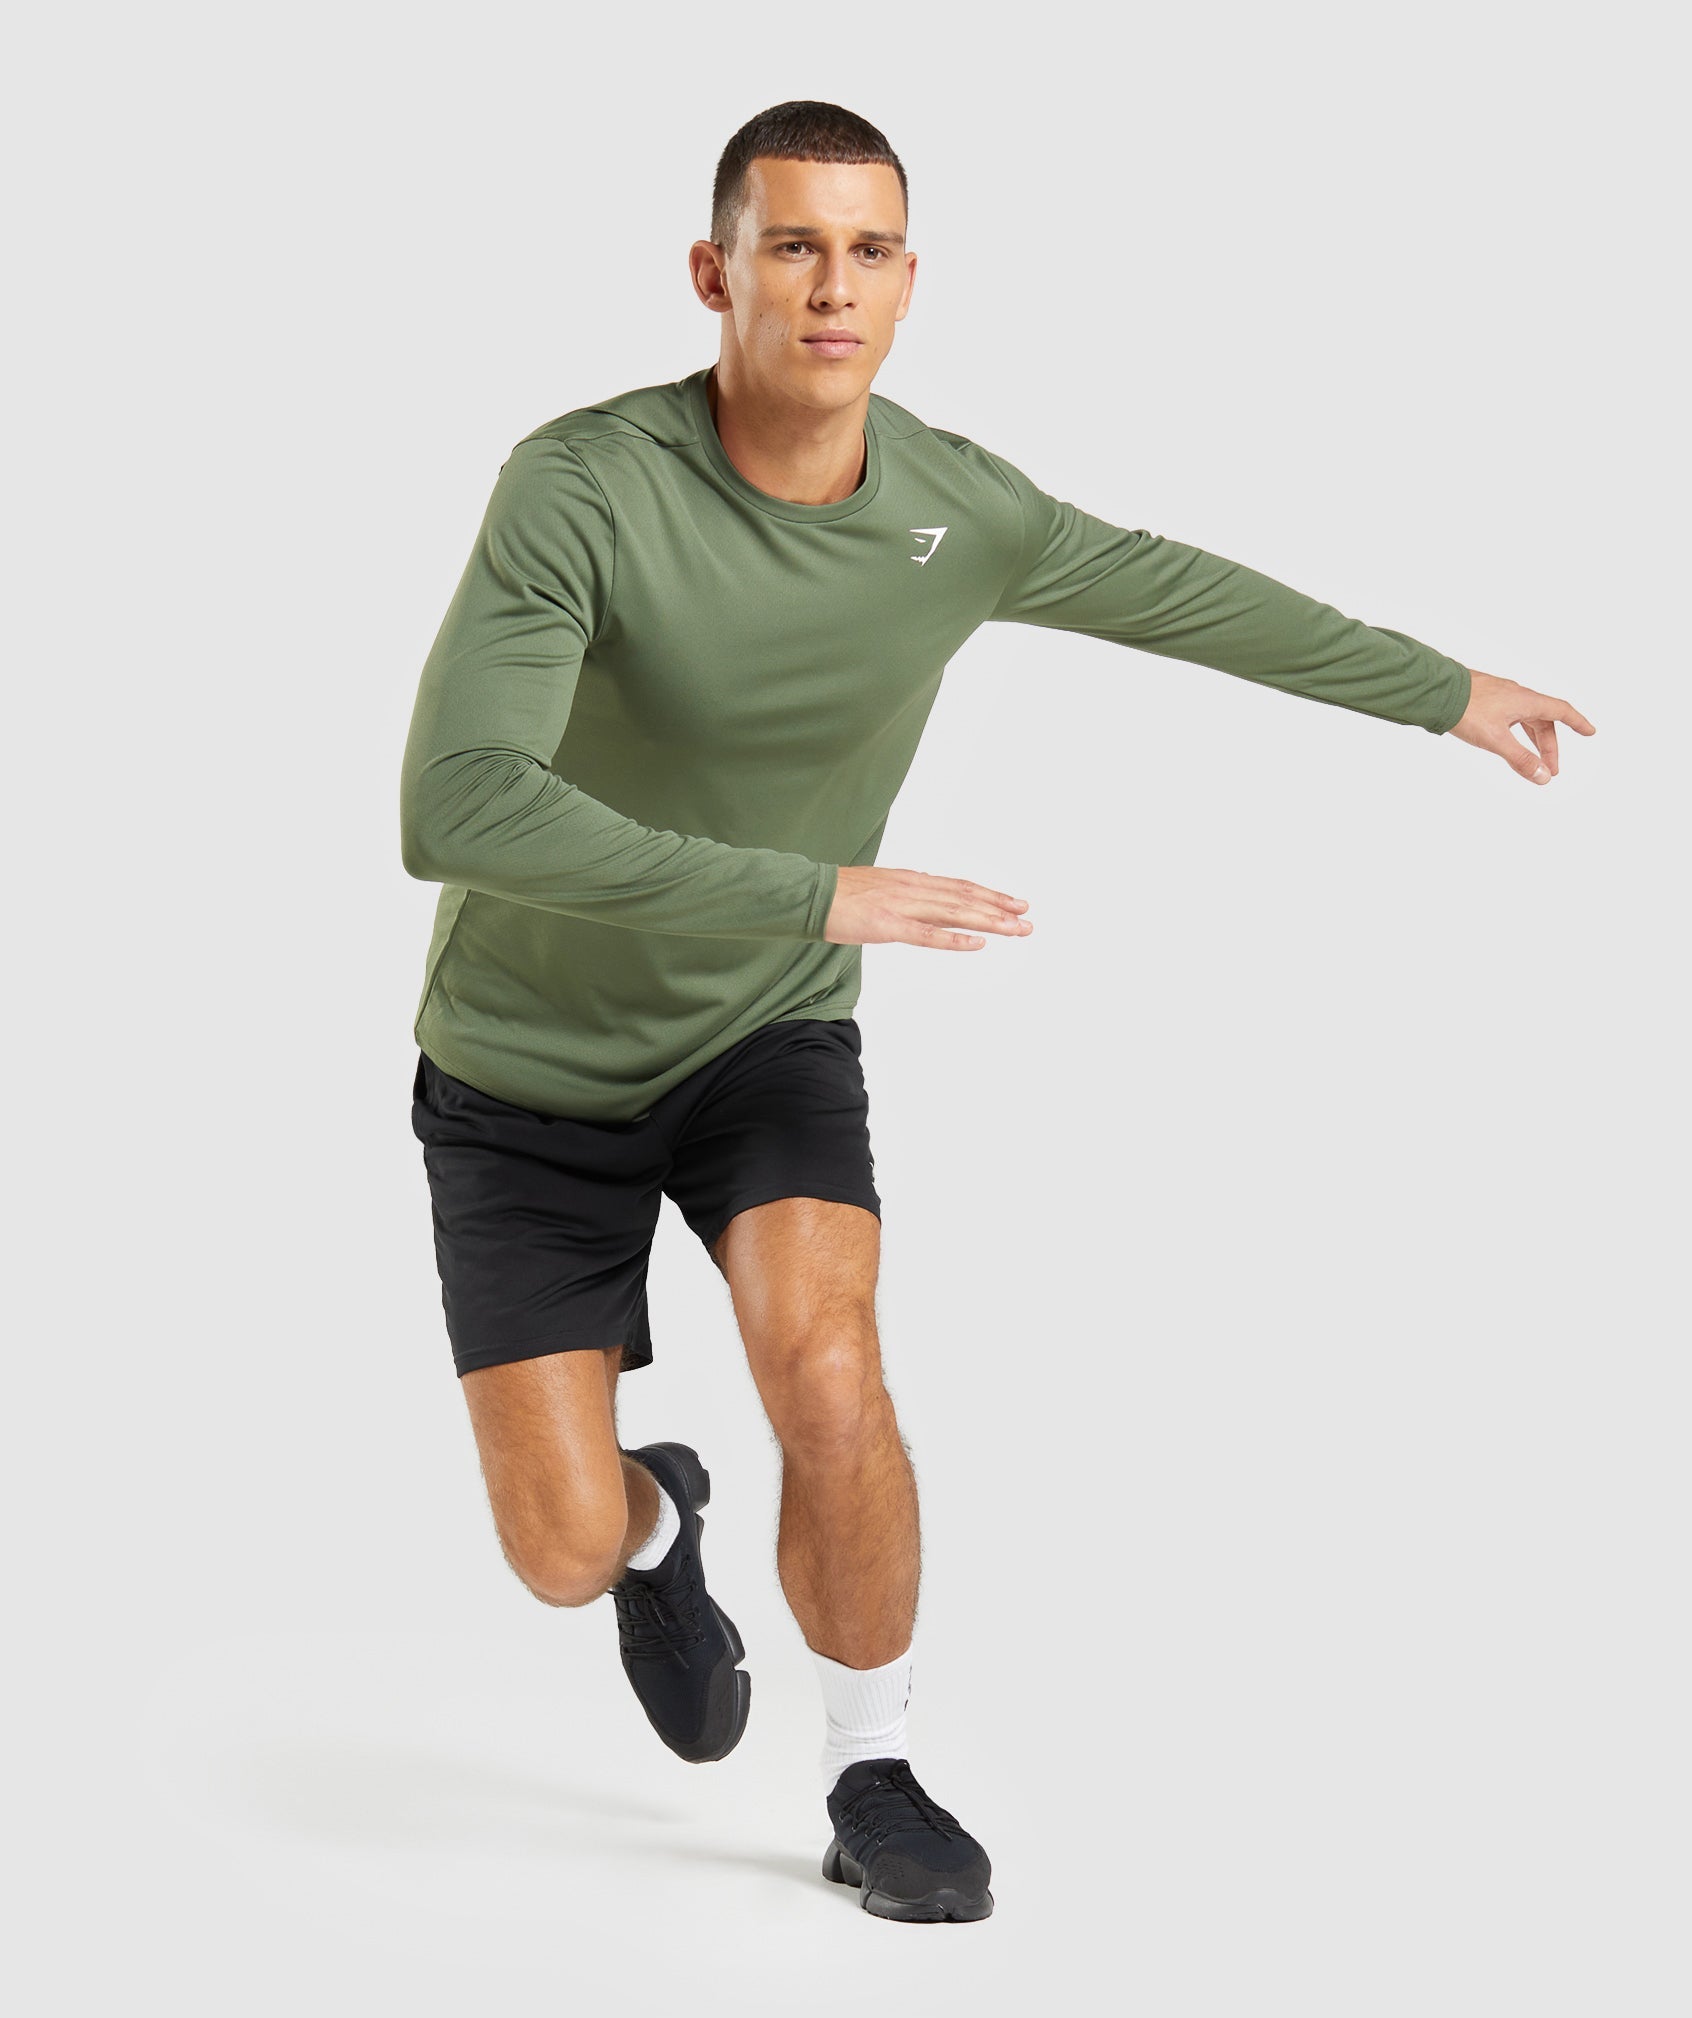 Arrival Long Sleeve T-Shirt in Core Olive